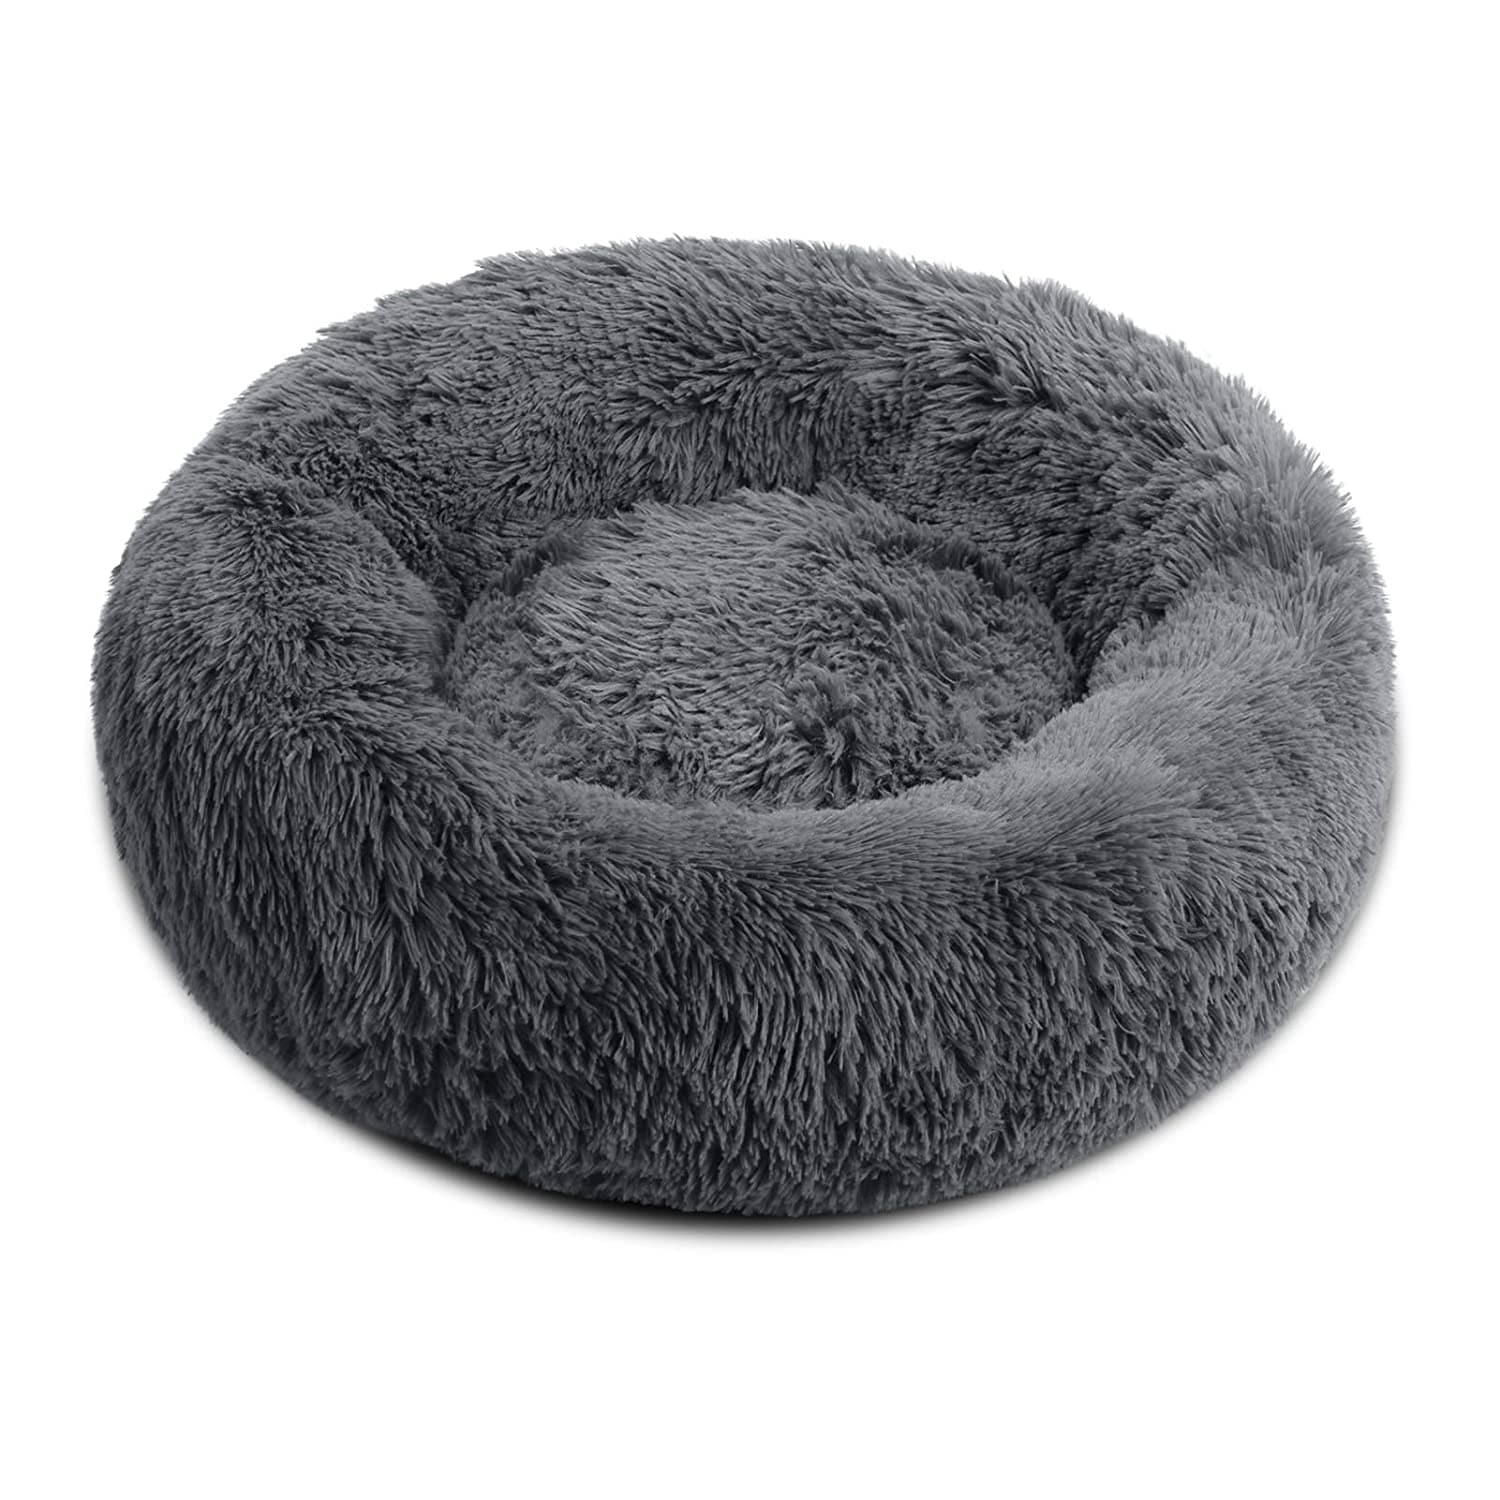 Donut Bed for cats (7278179156118)